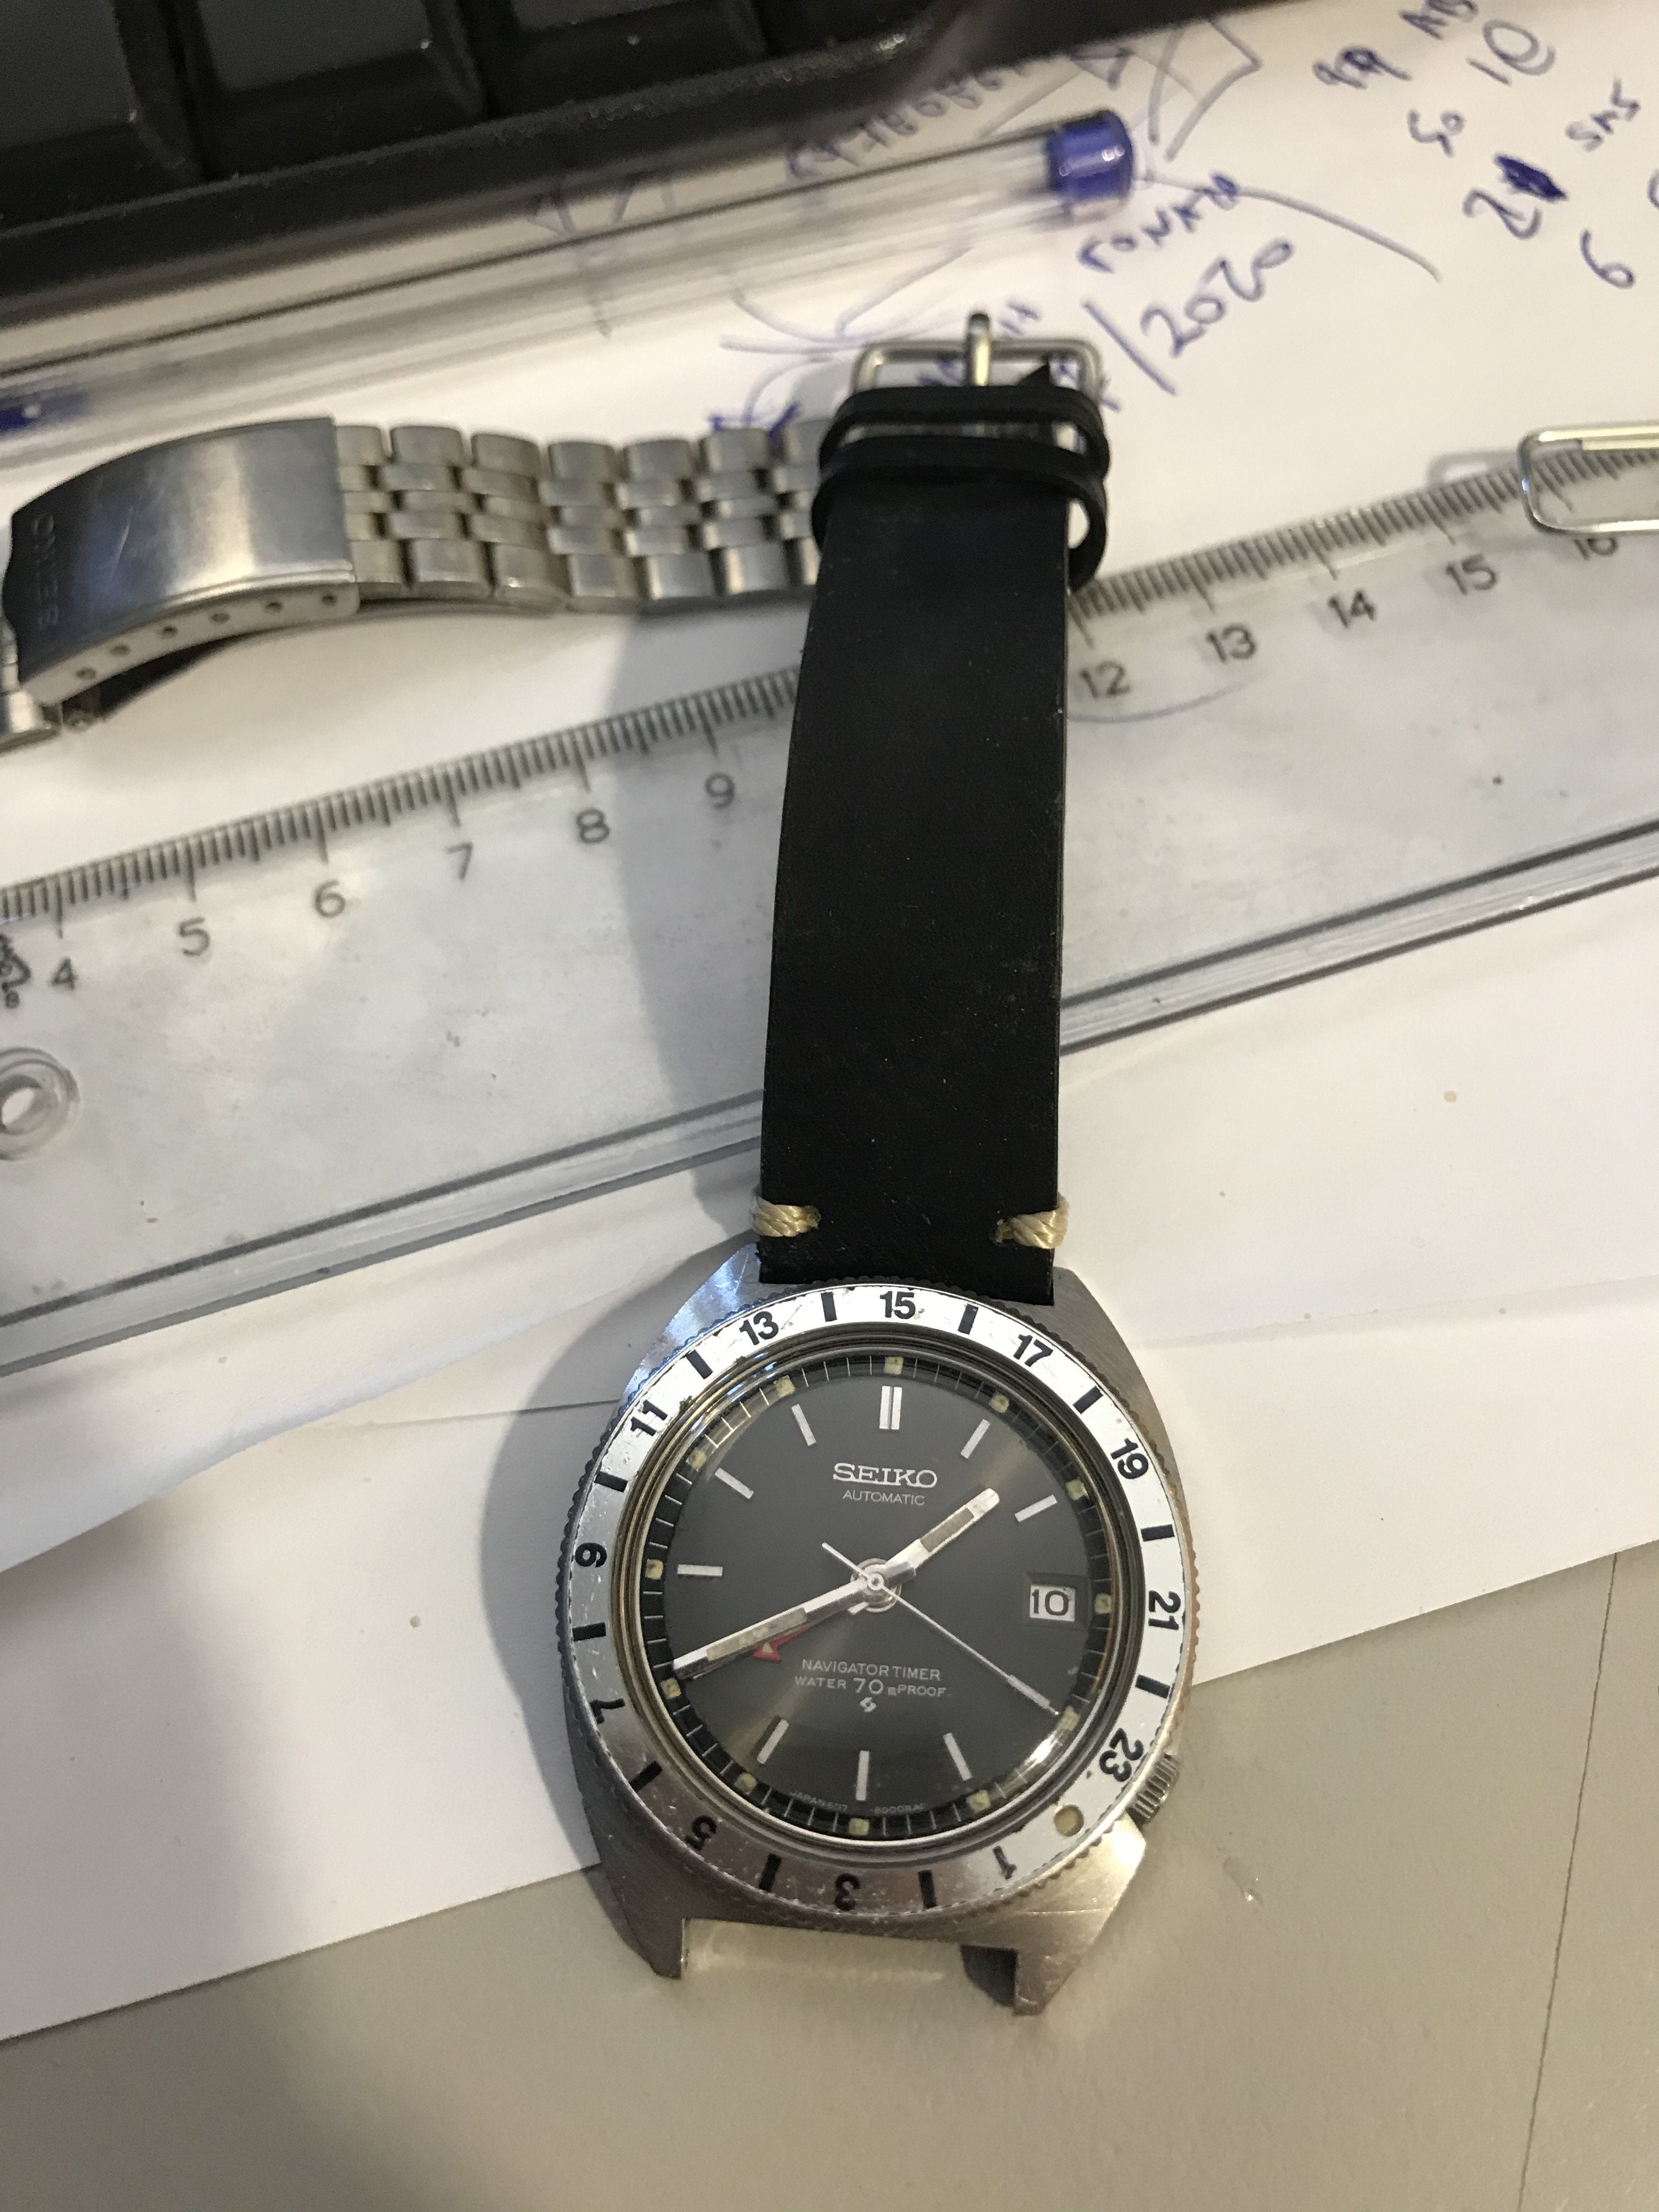 HELP on a seiko 6117-8000 | The Watch Site